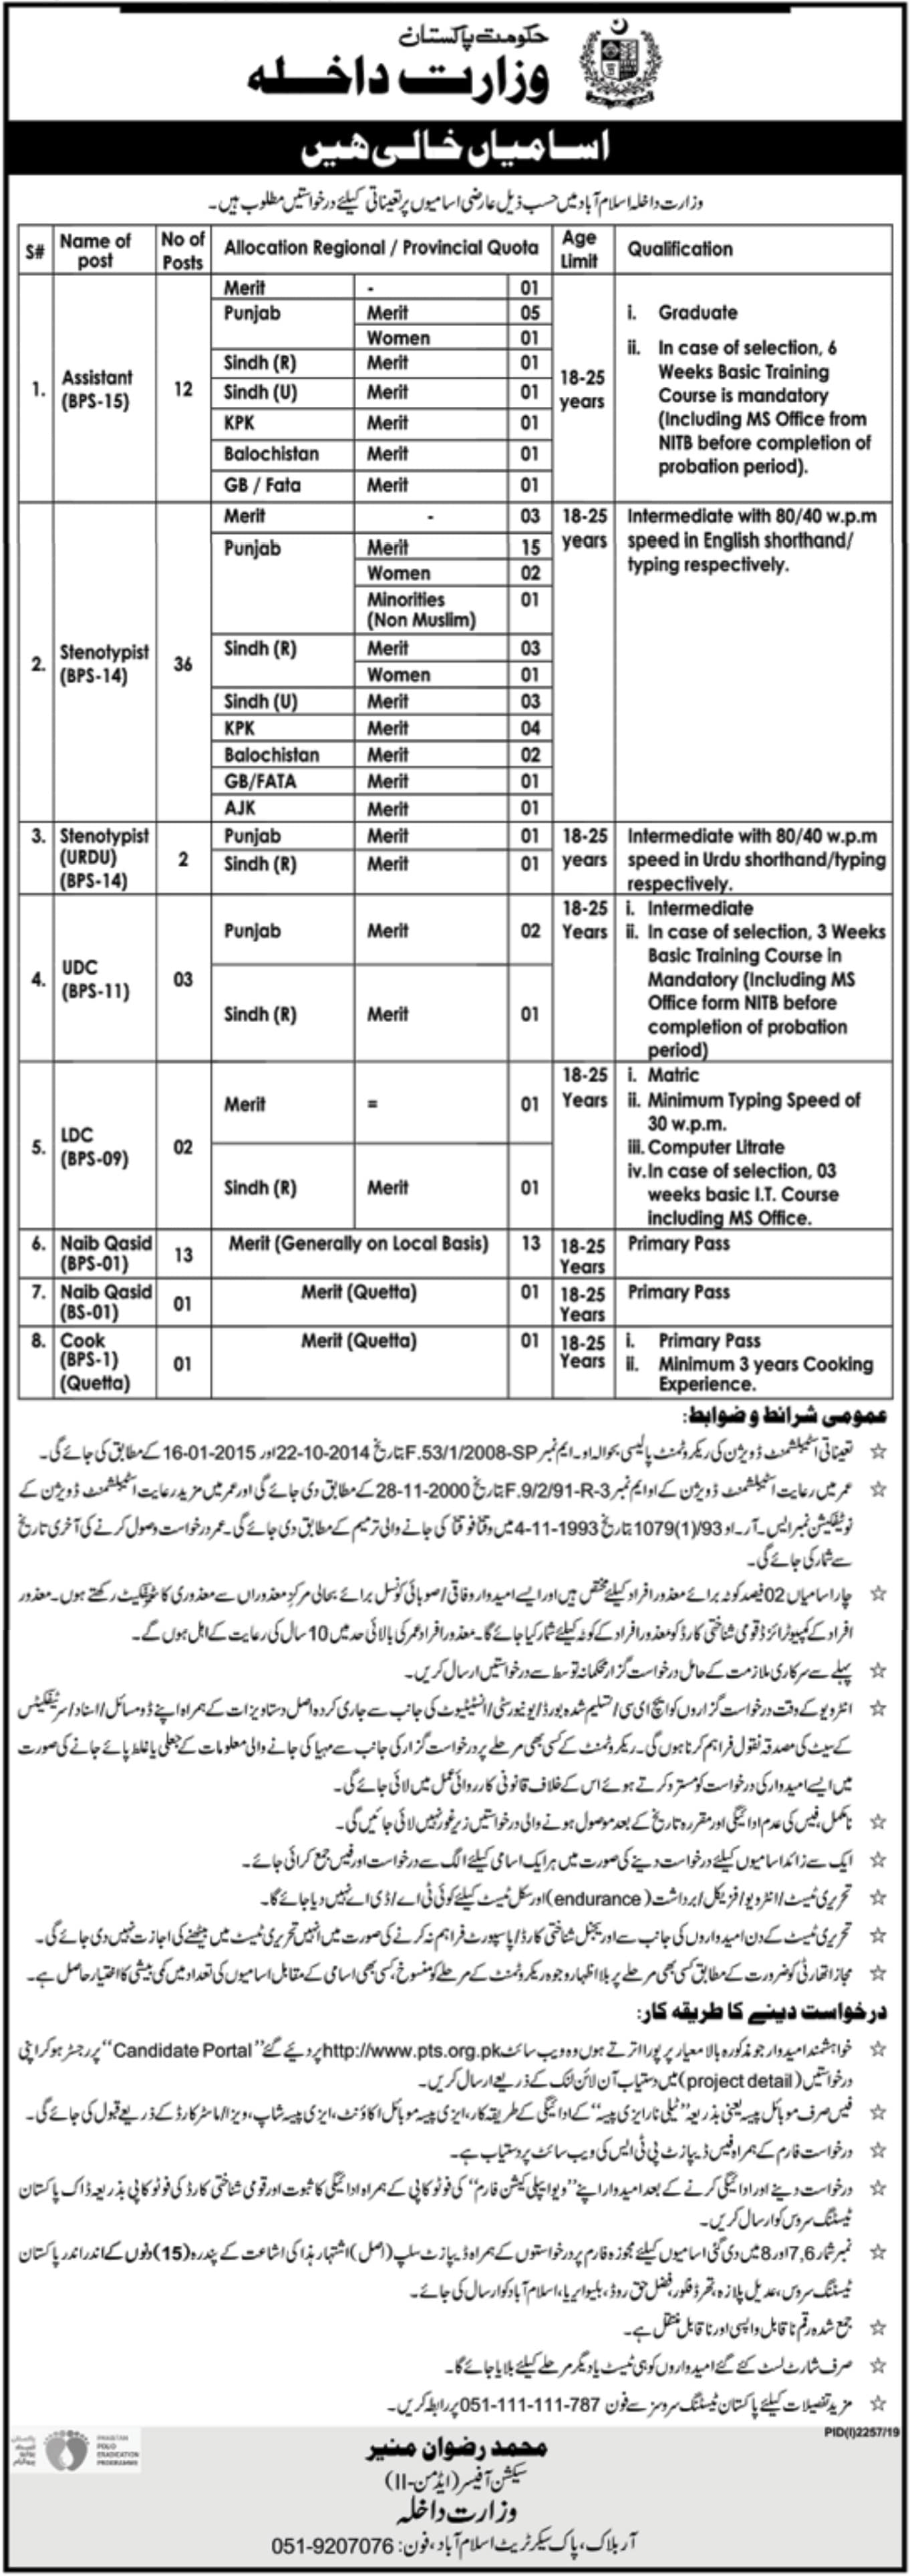 Jobs-in-Ministry-Of-Interior